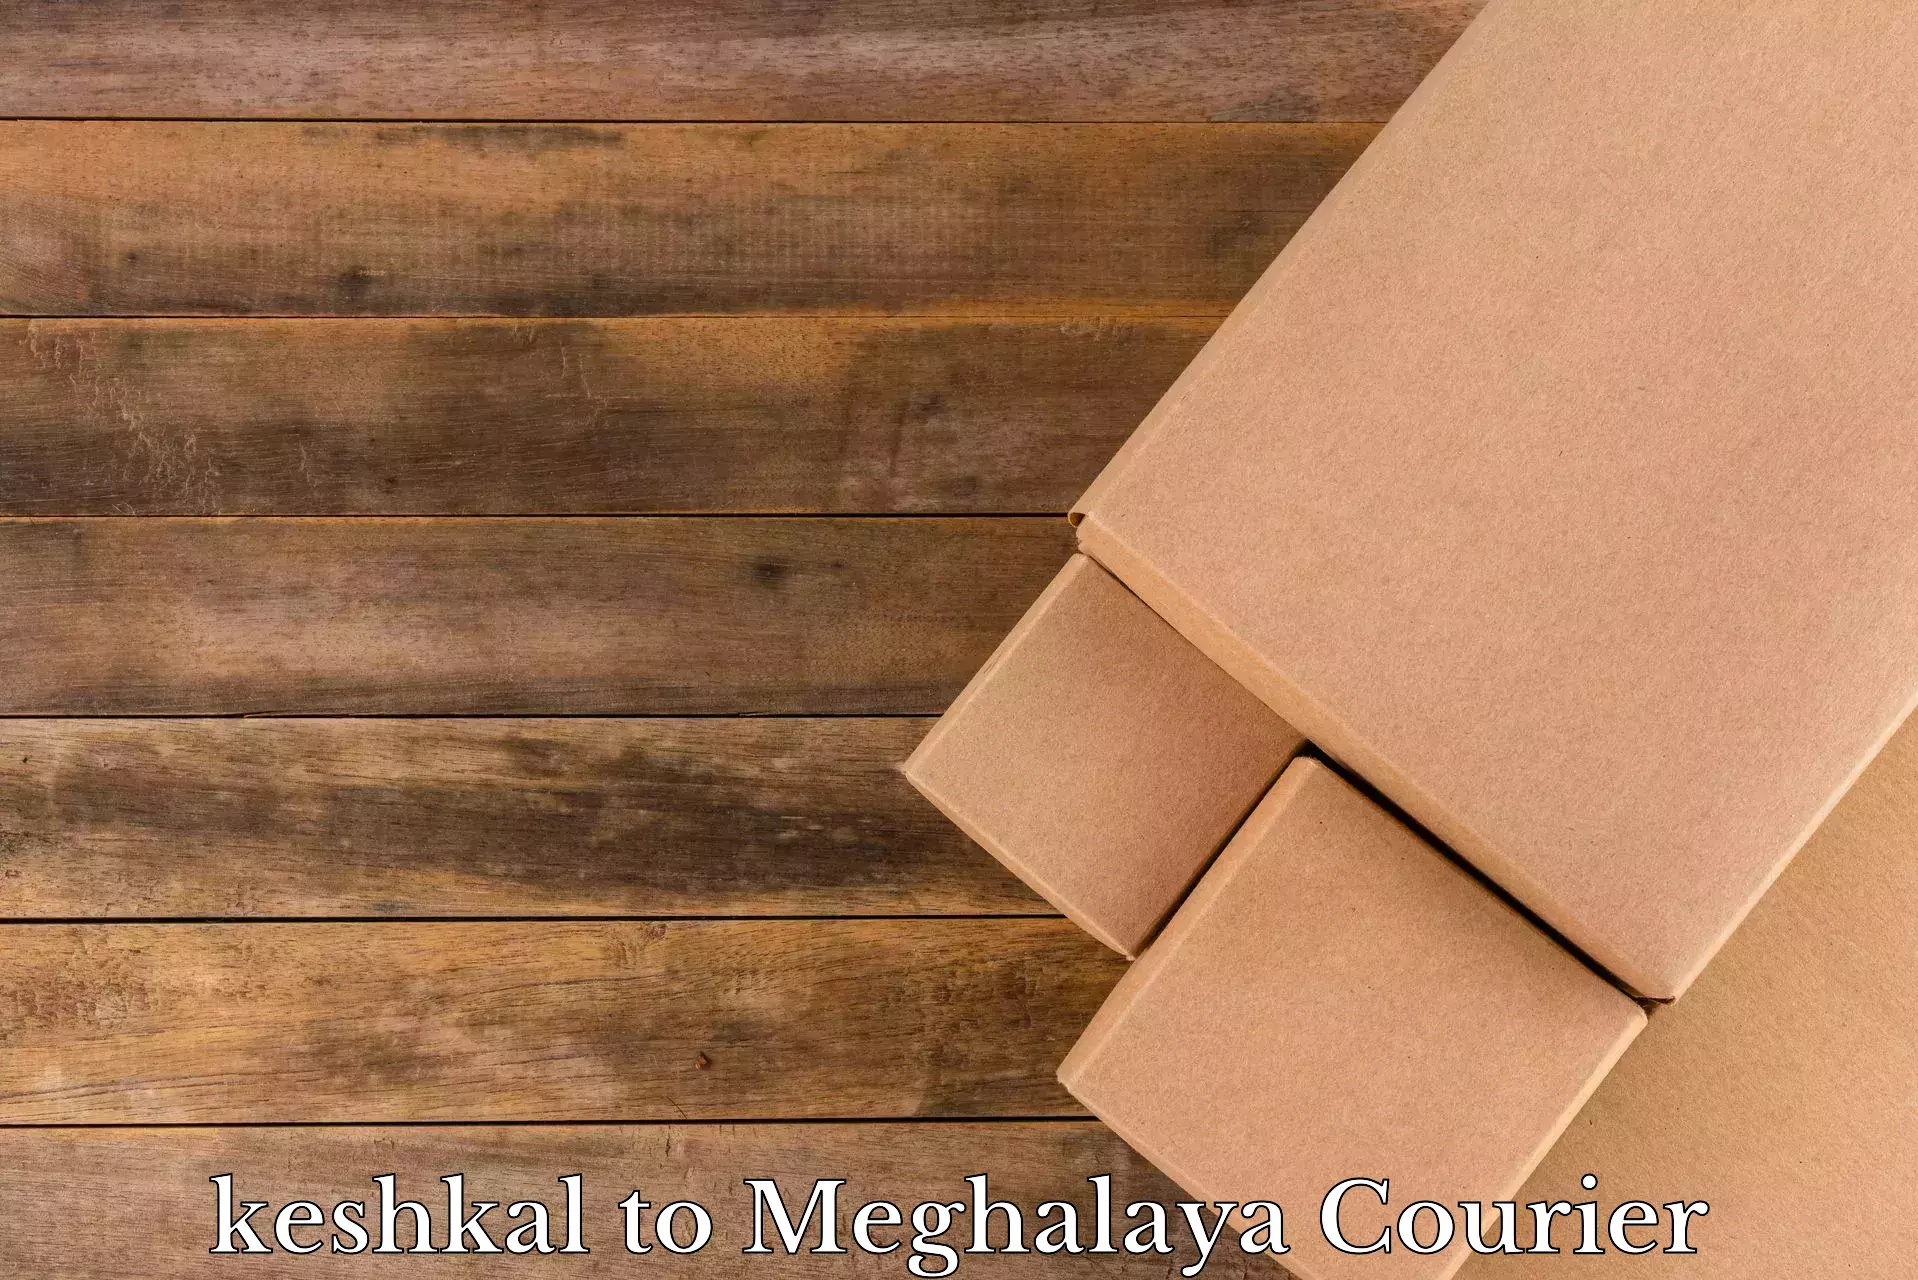 Packing and moving services keshkal to Shillong